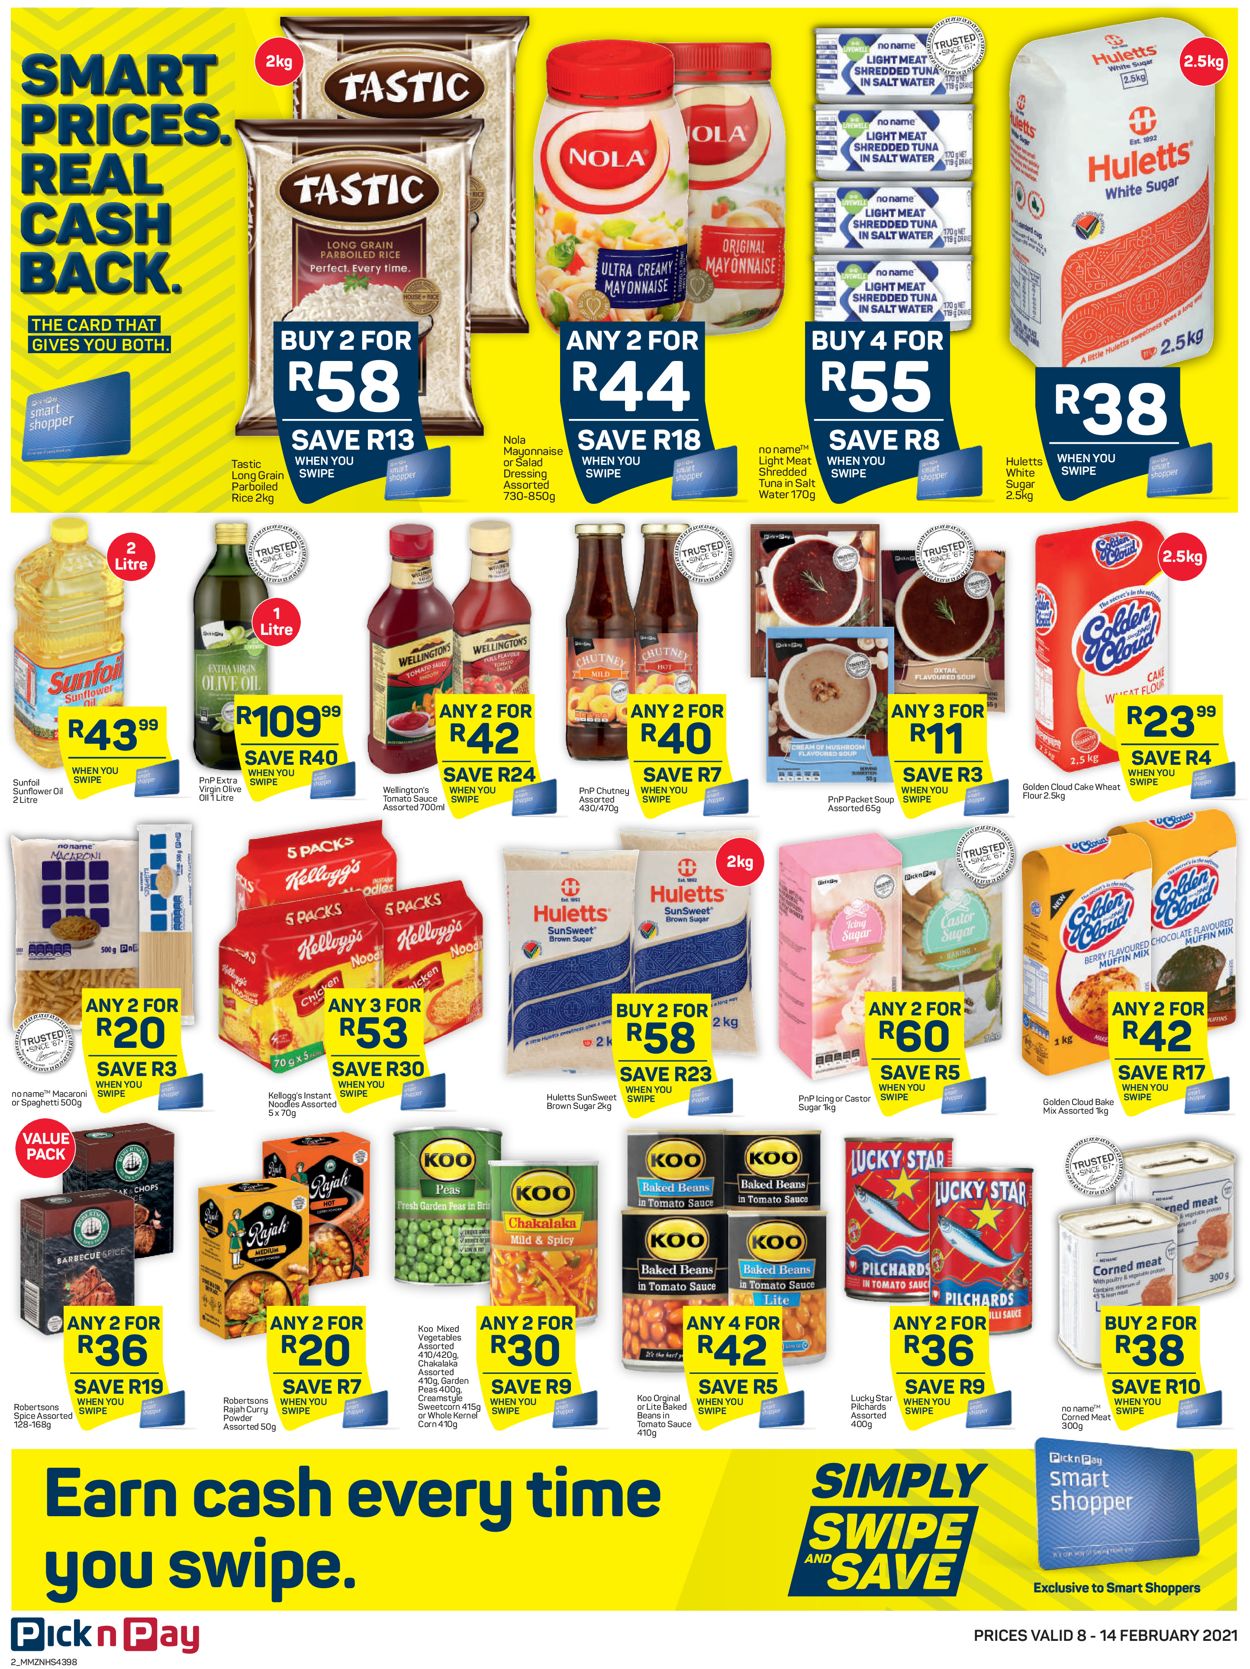 Pick n Pay Catalogue - 2021/02/08-2021/02/14 (Page 2)